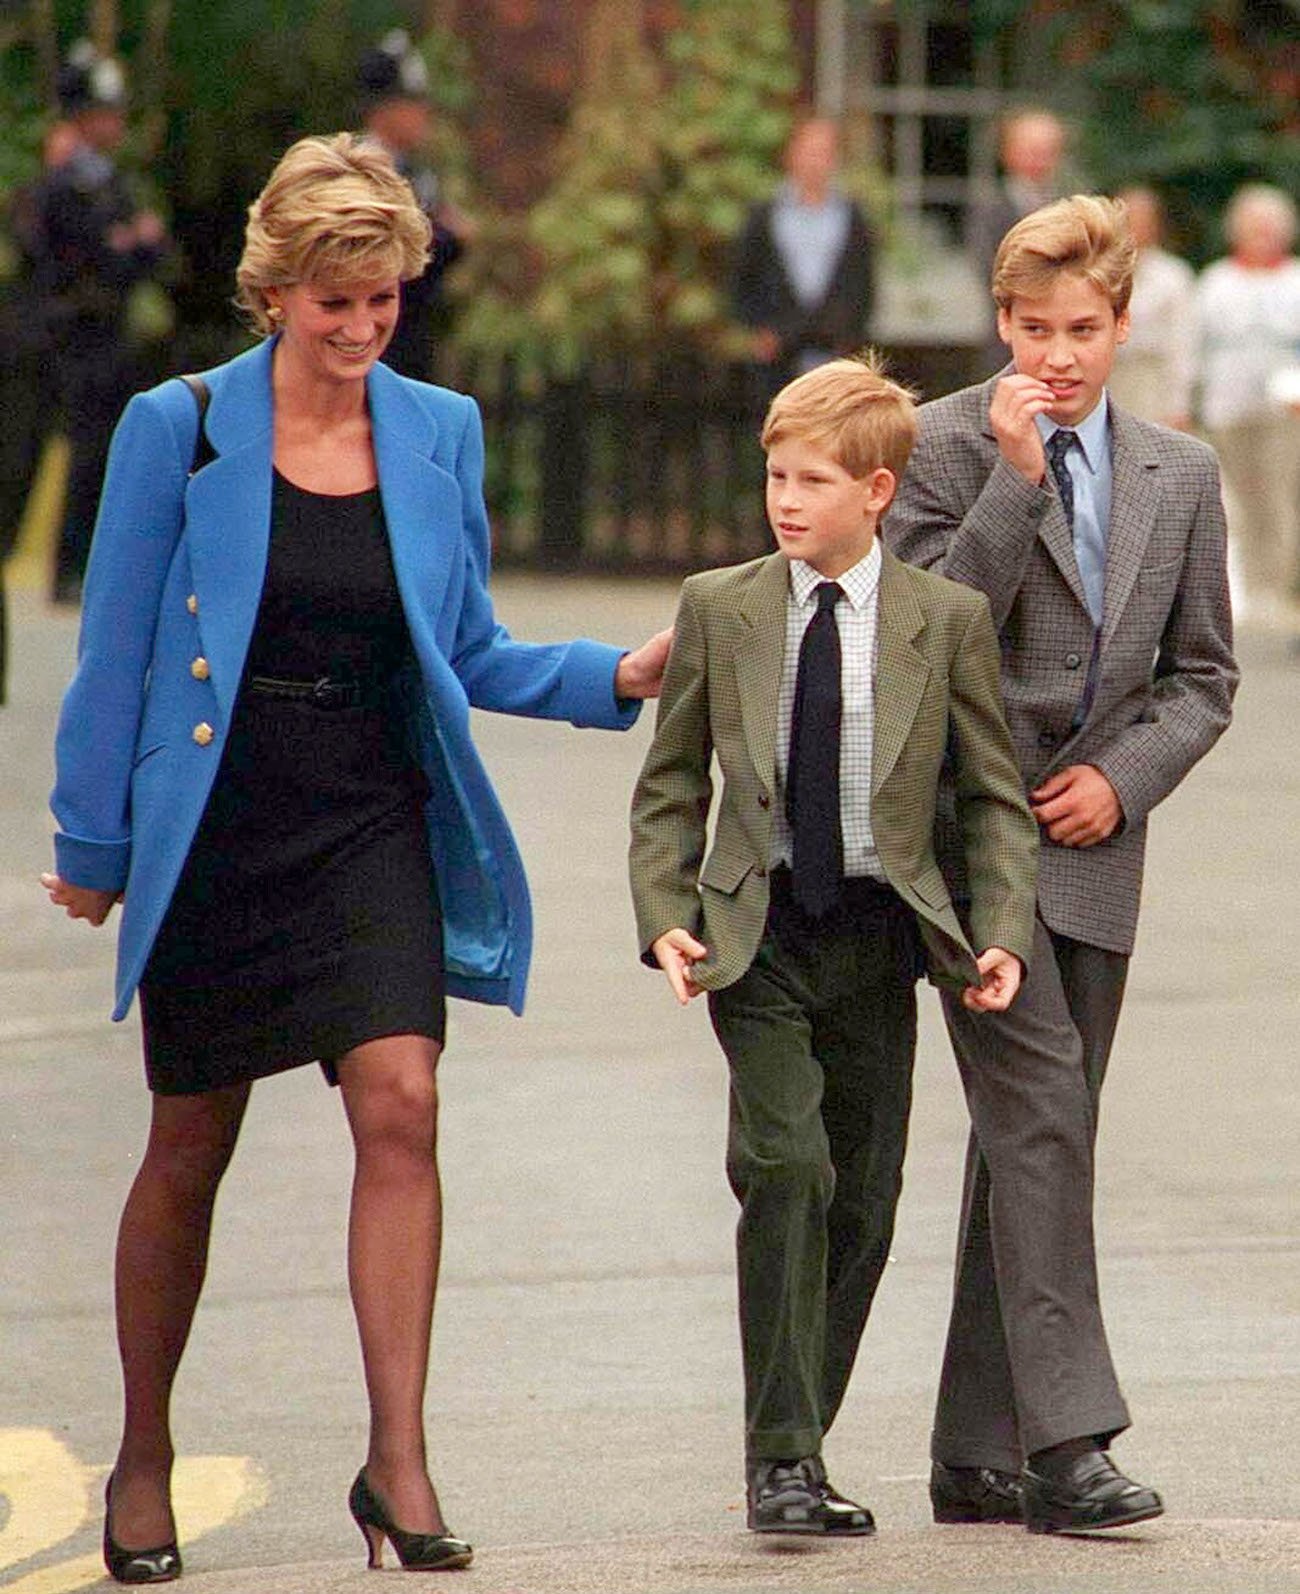 Princess Diana walking with her sons, Prince Harry and Prince William